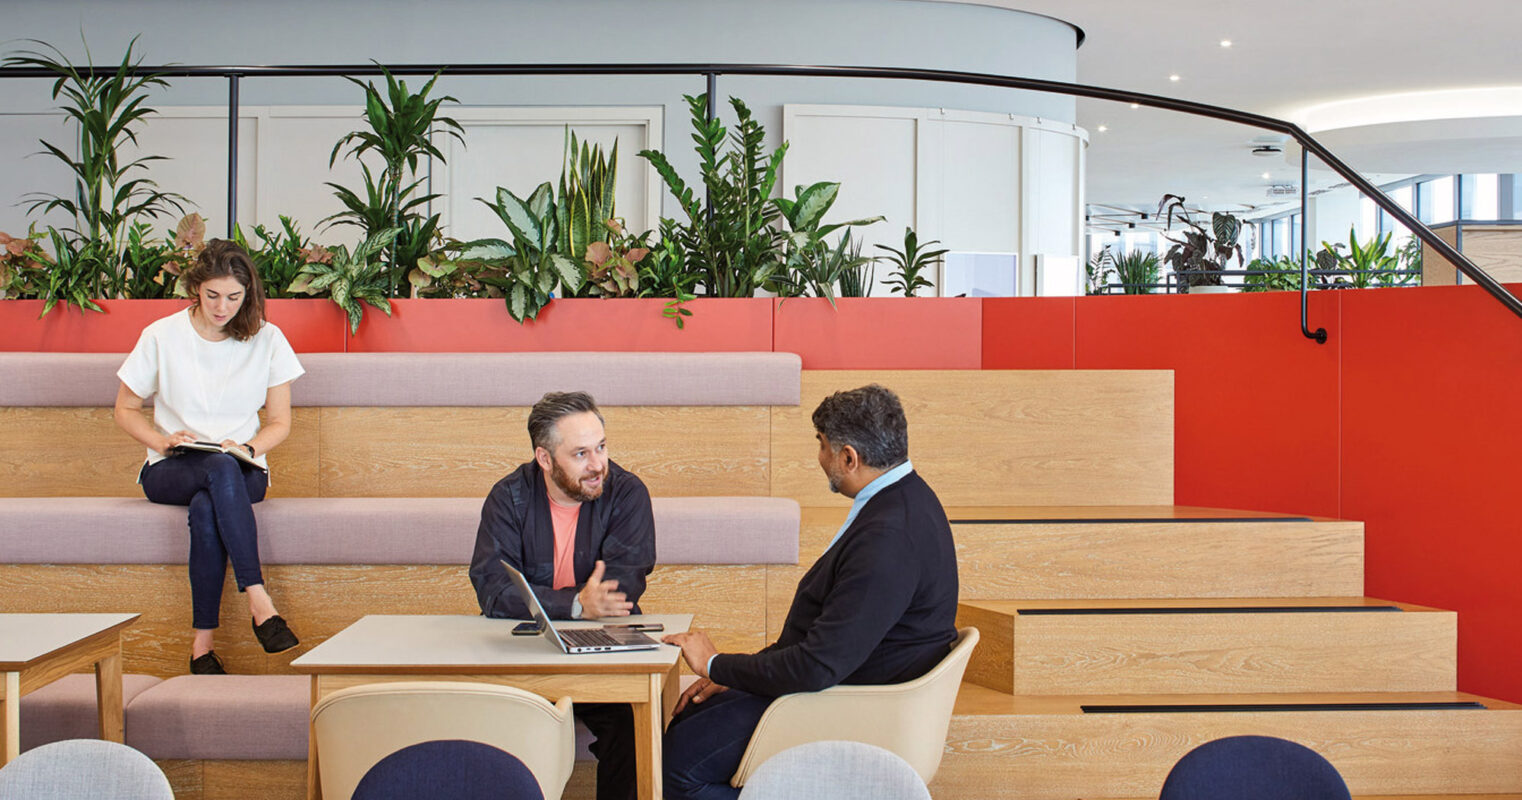 Open-plan office with layered seating arrangement, featuring pink and neutral-hued upholstery, wooden bleachers, and vibrant red partitions. Greenery accents the space with a sense of biophilic design, fostering a collaborative and relaxed working environment.